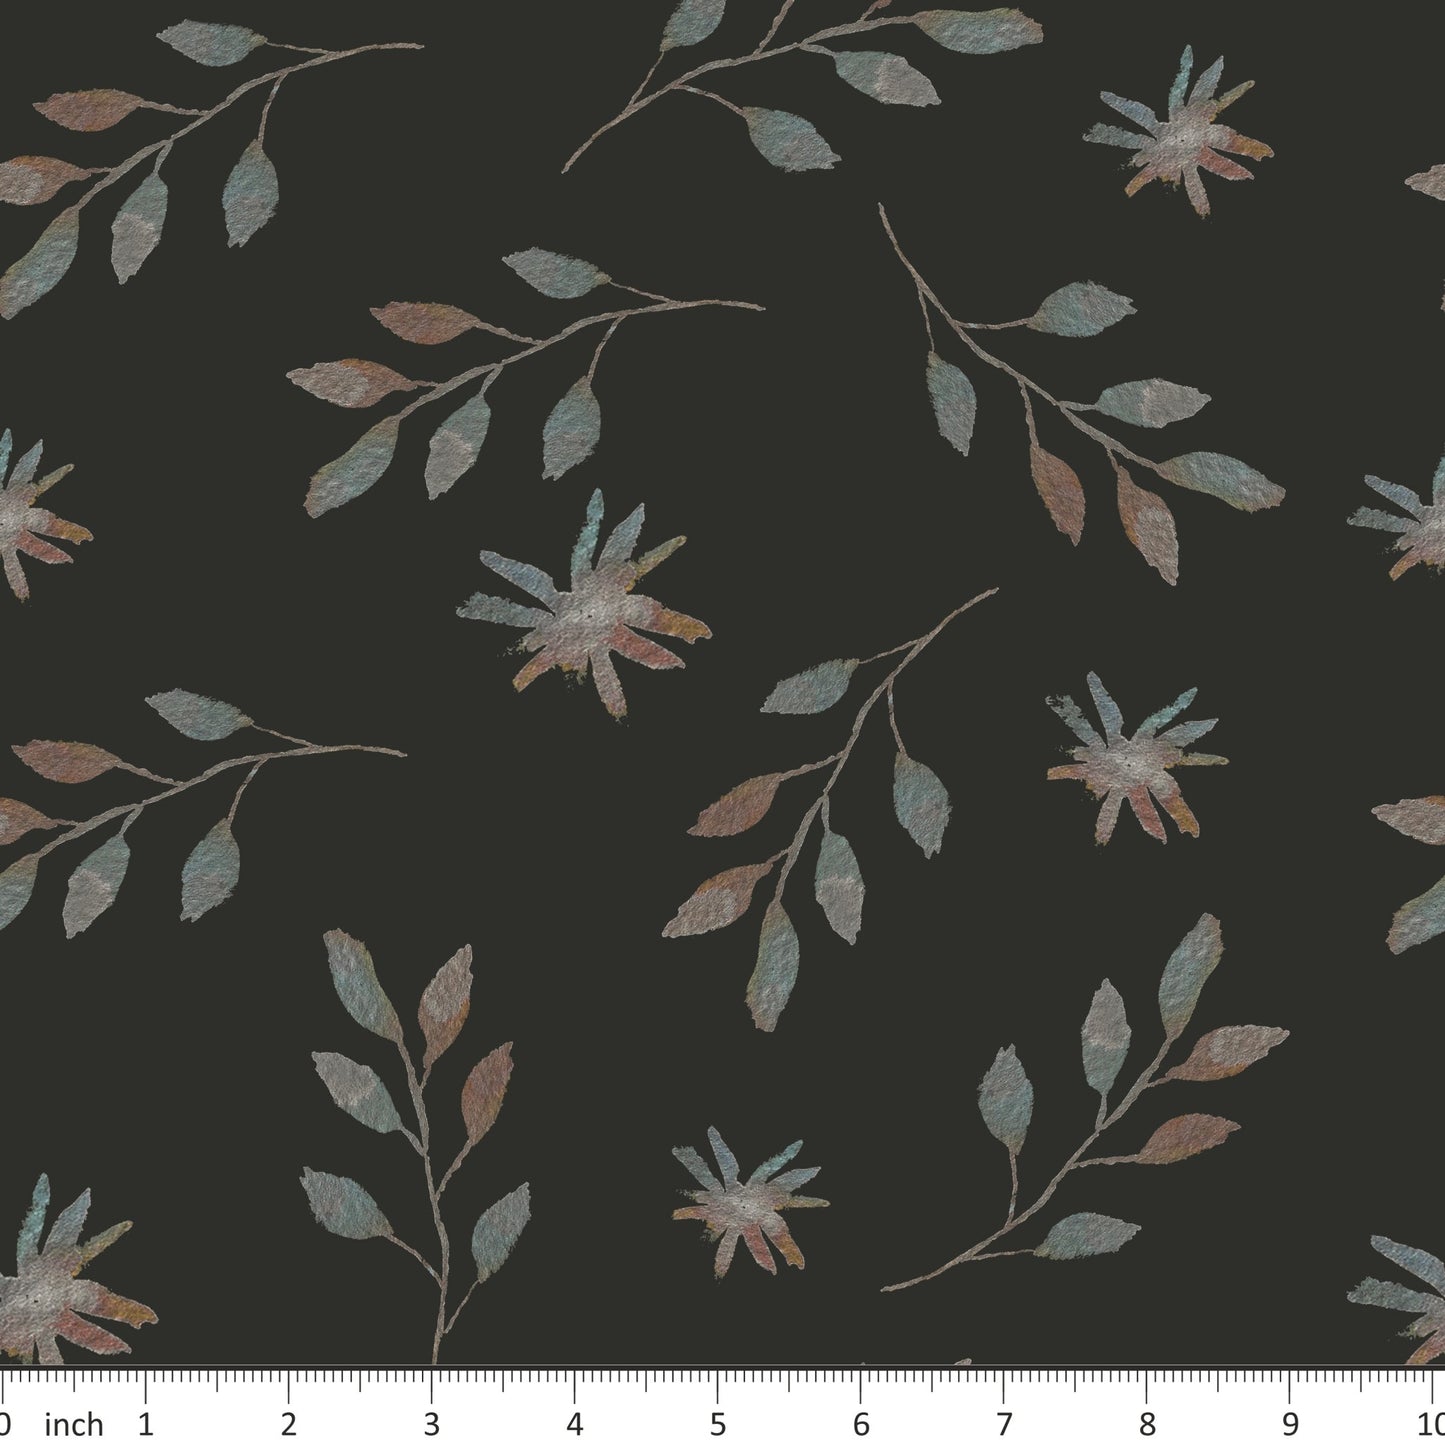 Tatra Cottage - Dark Autumn Floral - Earthy Autumn Floral Coordinate - Little Rhody Sewing Co.